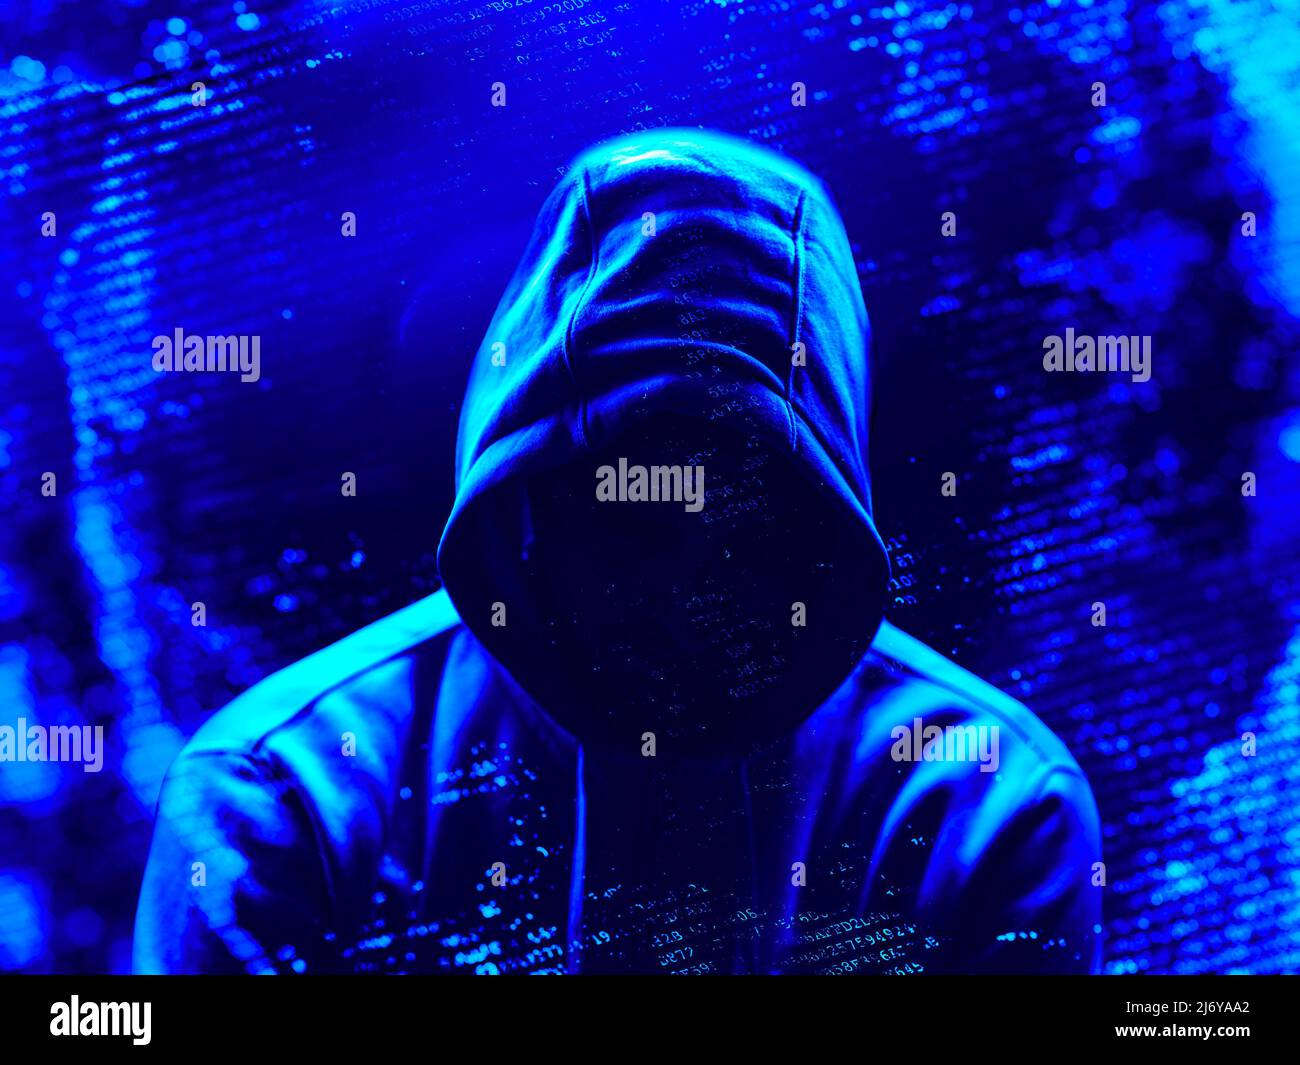 A hacker in shadow surrounded by computer code Stock Photo